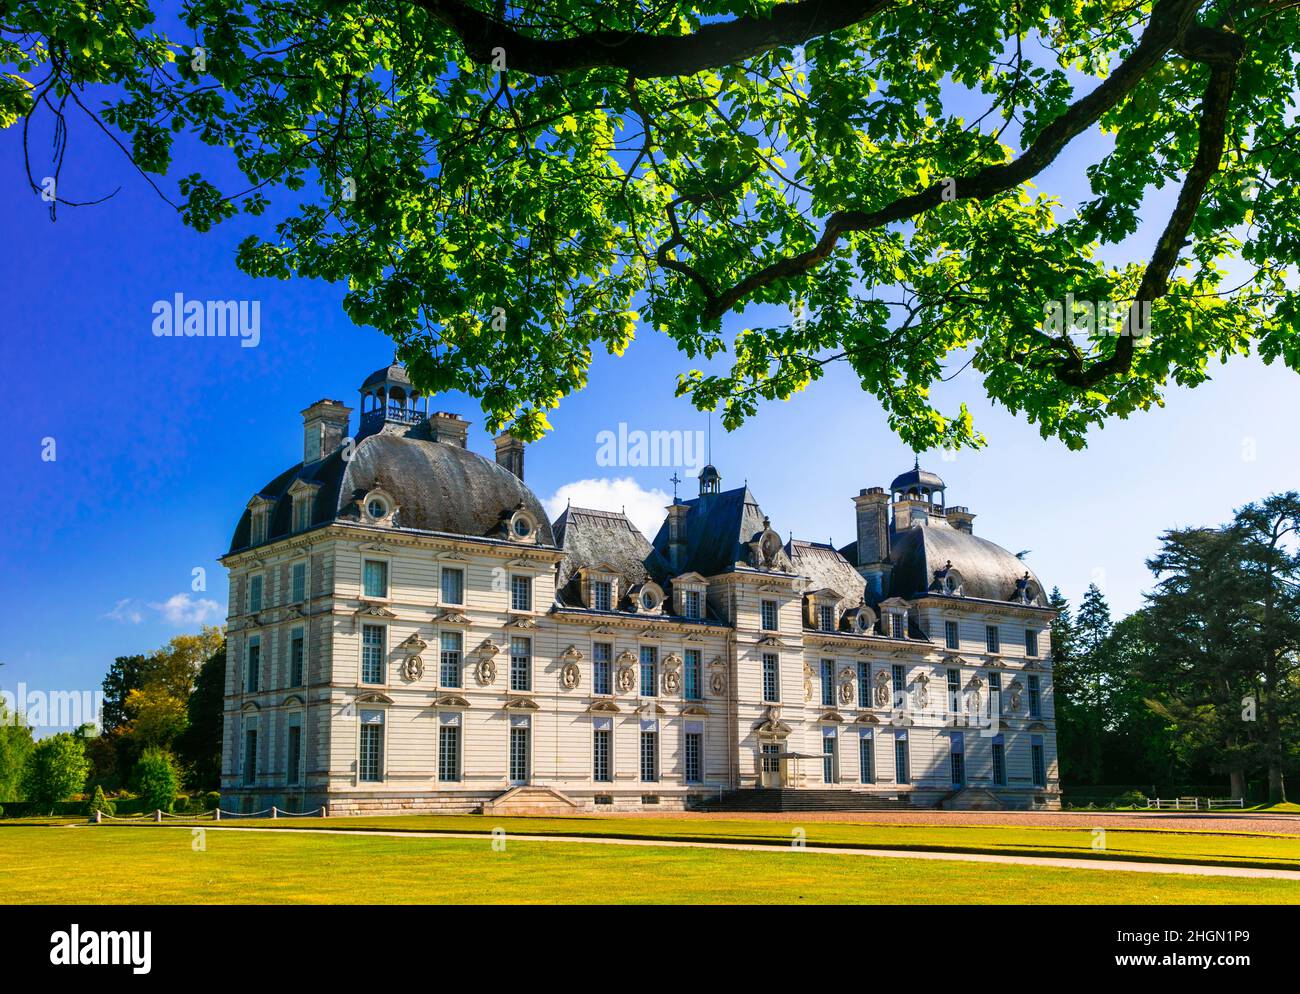 Medieval castle of France in Loire valley - beautiful elegant Chateau de Cheverny, popular tourist attraction Stock Photo